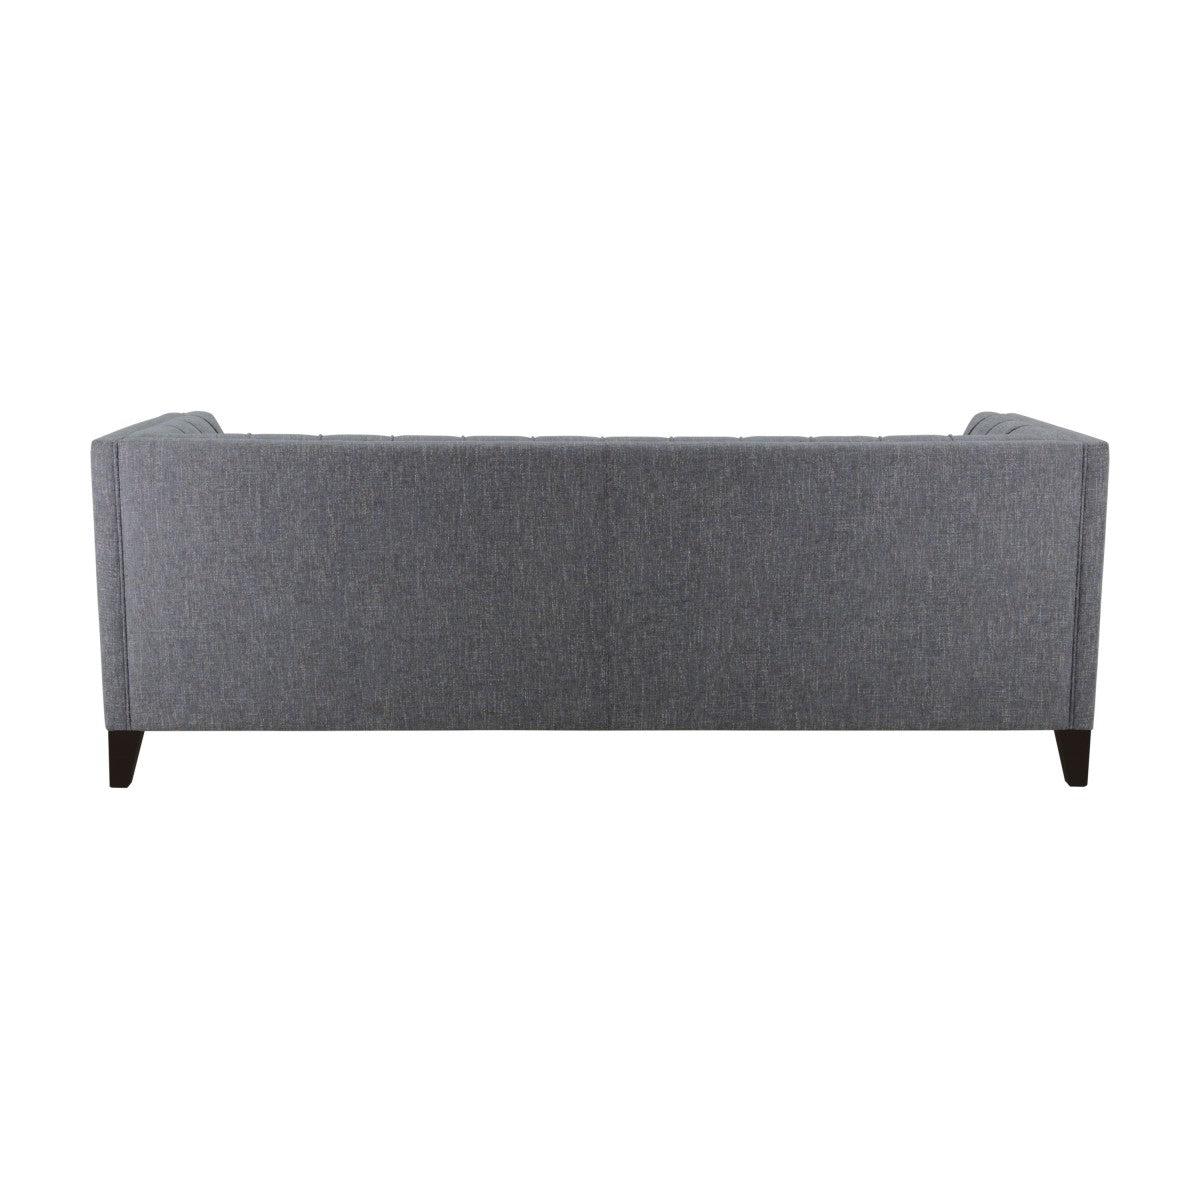 Lixis Bespoke Upholstered Modern Style Four Seater Sofa MS9472F Custom Made To Order